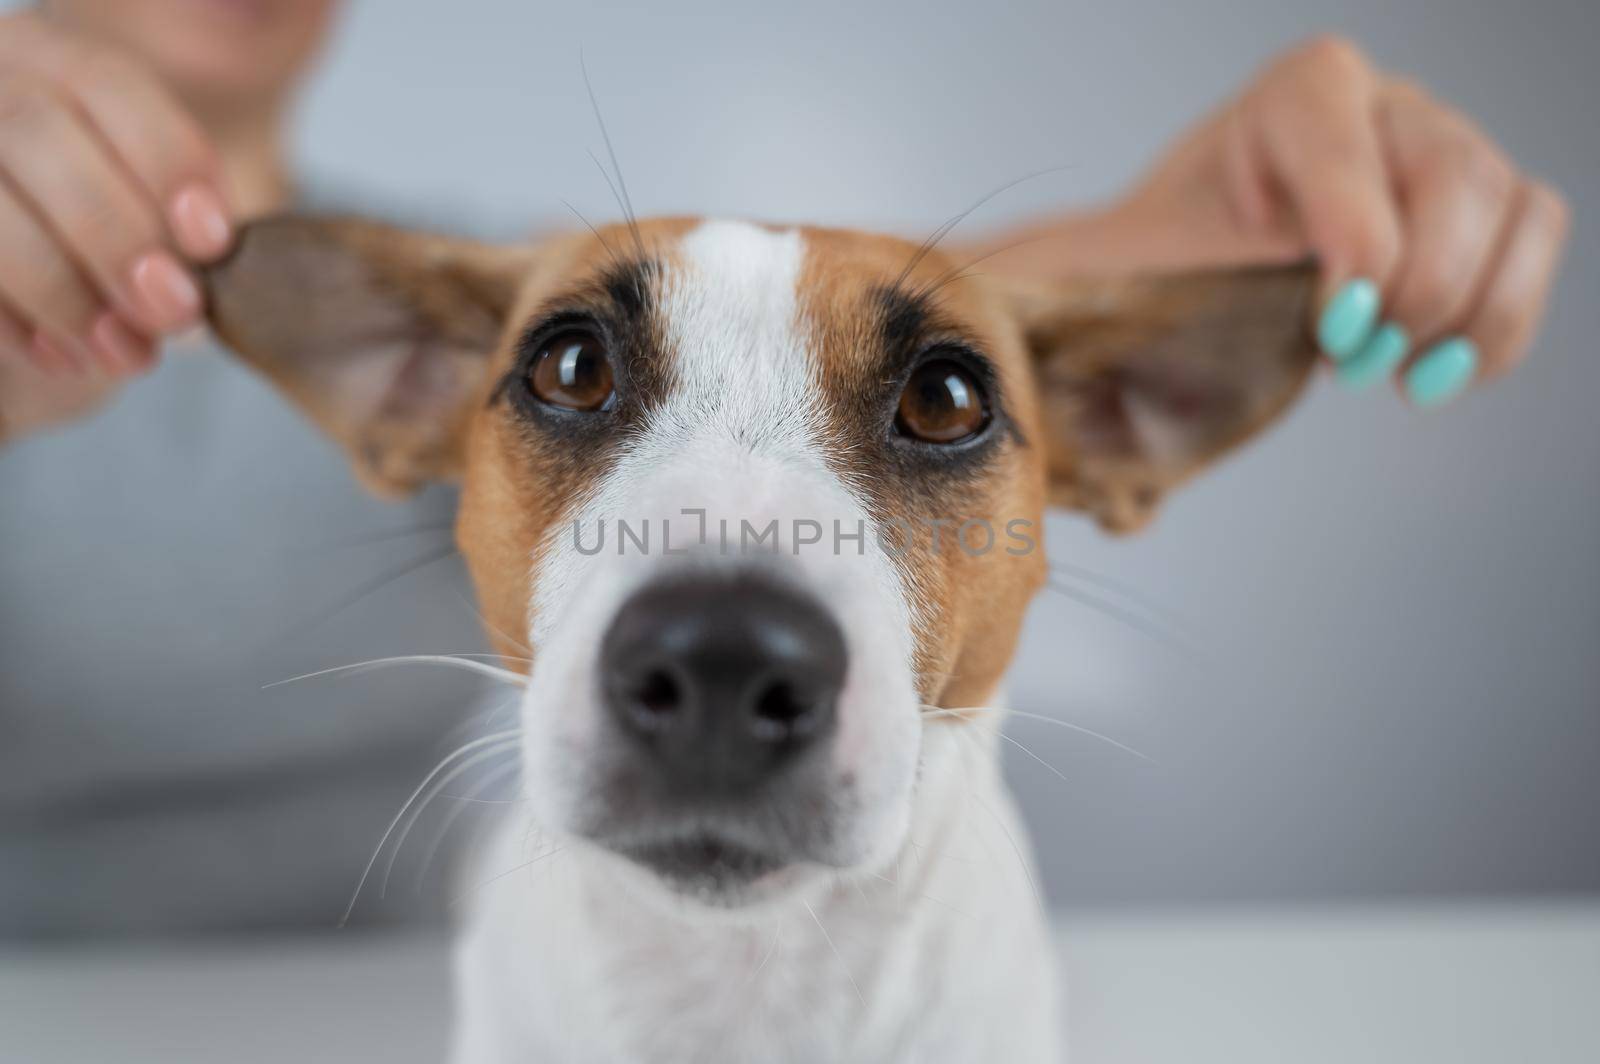 The woman holds the ears of the dog Jack Russell Terrier and pulls it in different directions by mrwed54